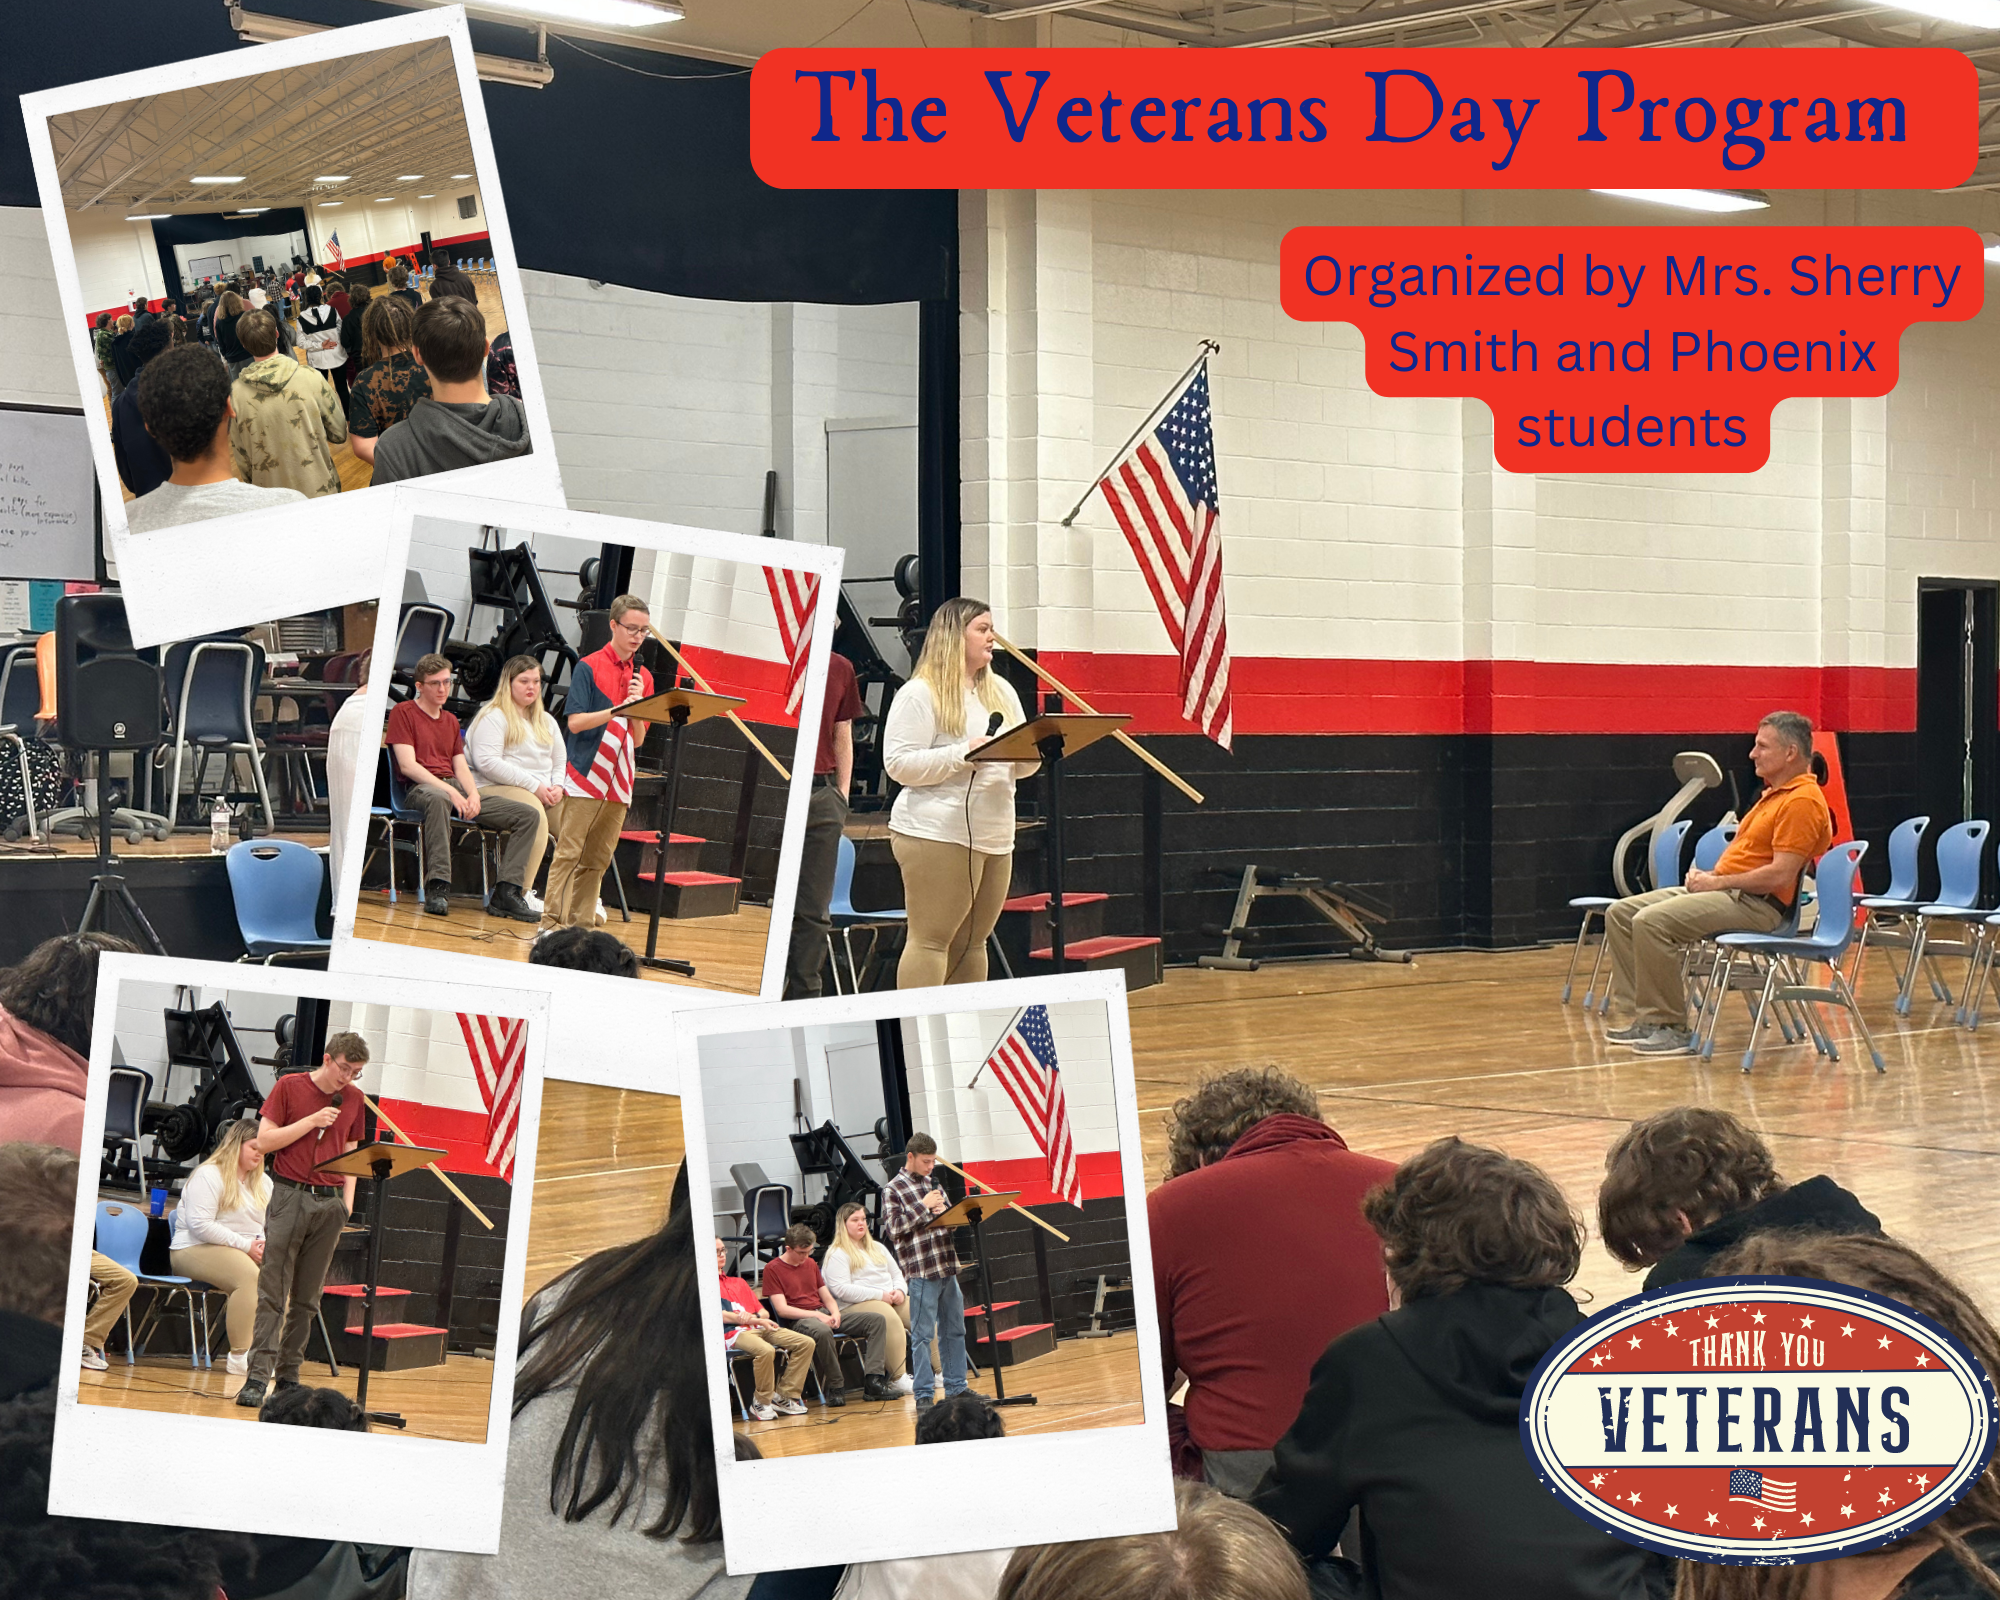 This is a picture of the veterans day program at the Phoenix school.